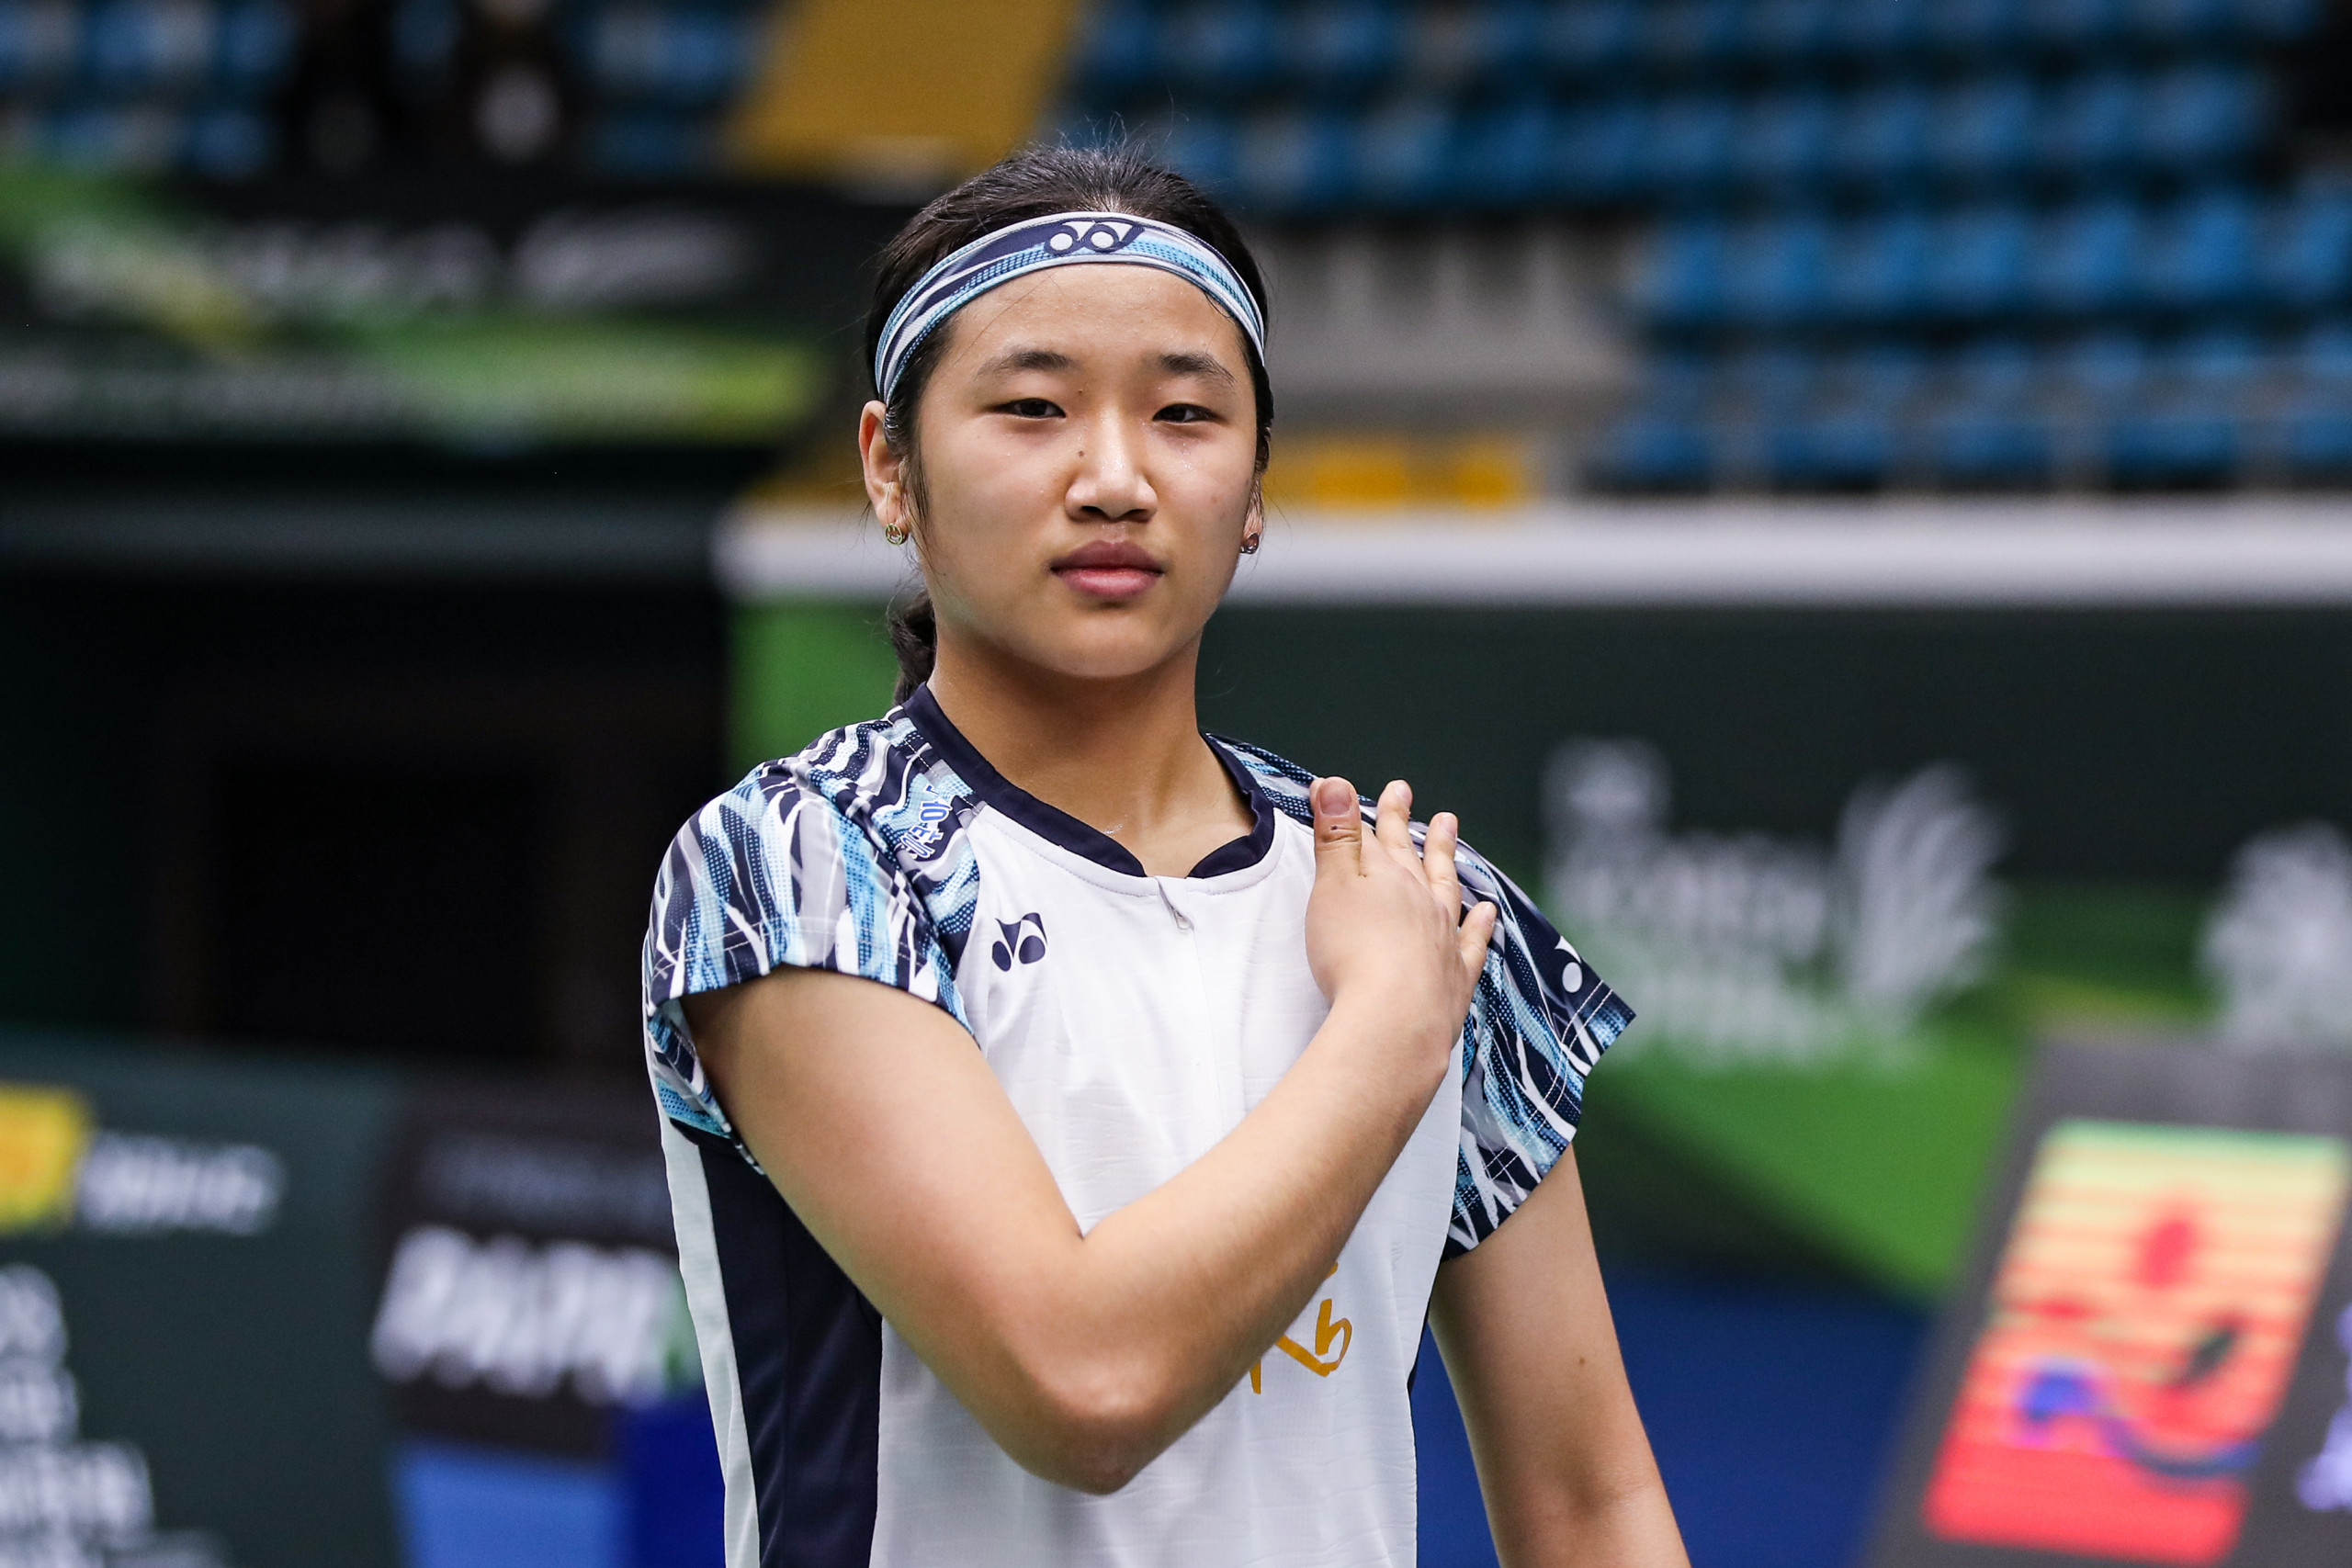 Momota has yet to find his winning touch this season.